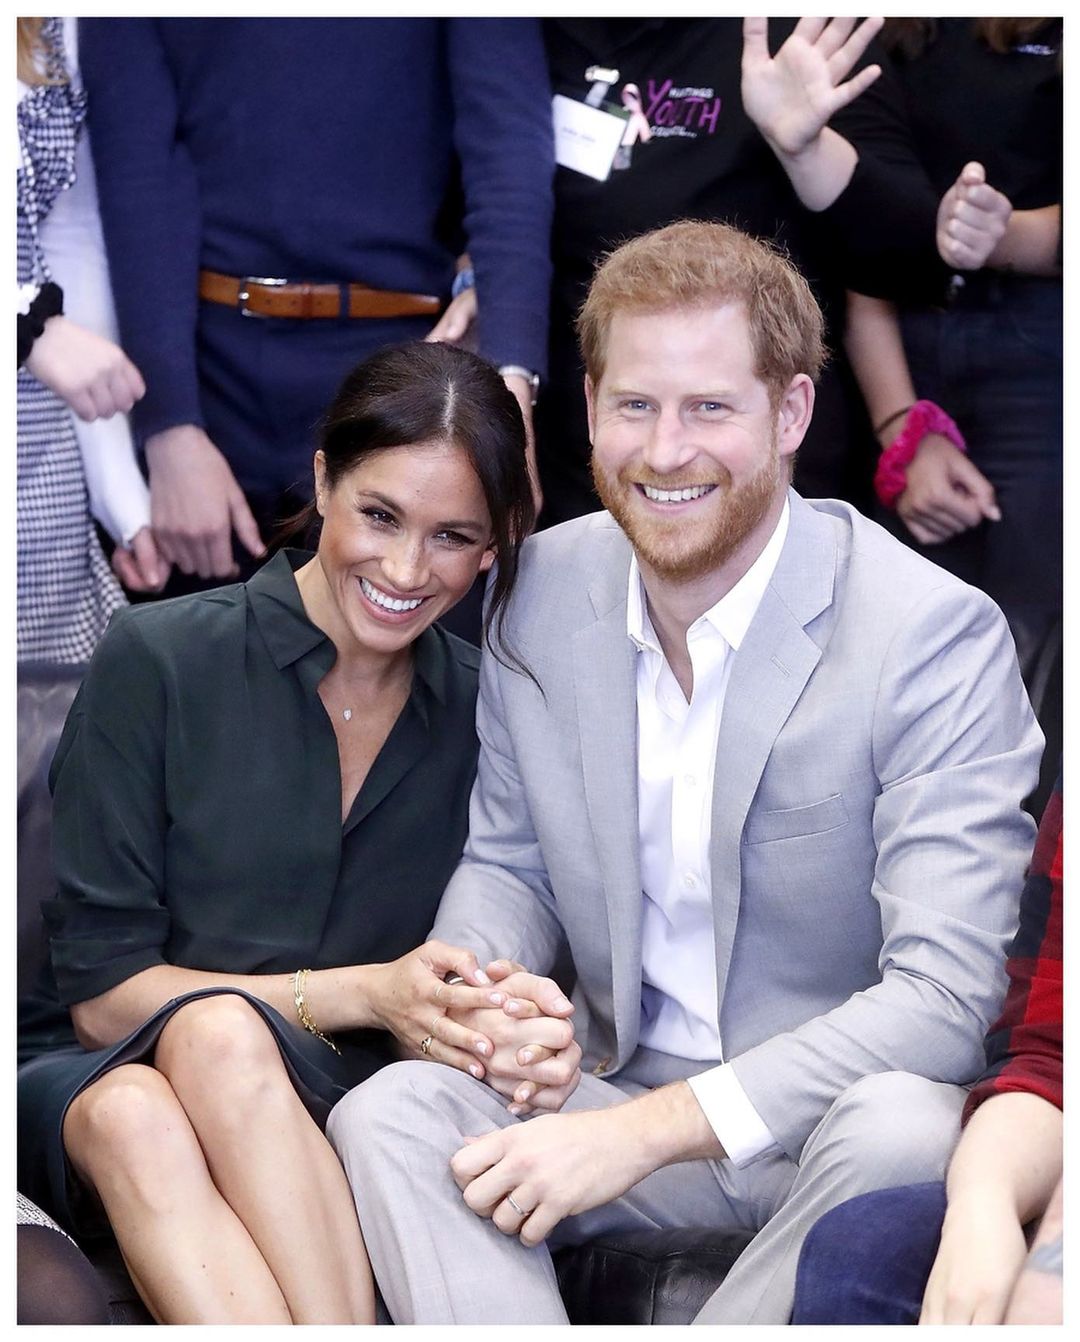 meghan-markle-prince-harry-quit-social-media-sol-bamba-cancer-latest-news-global-world-stories-tuesday-january-2020-style-rave